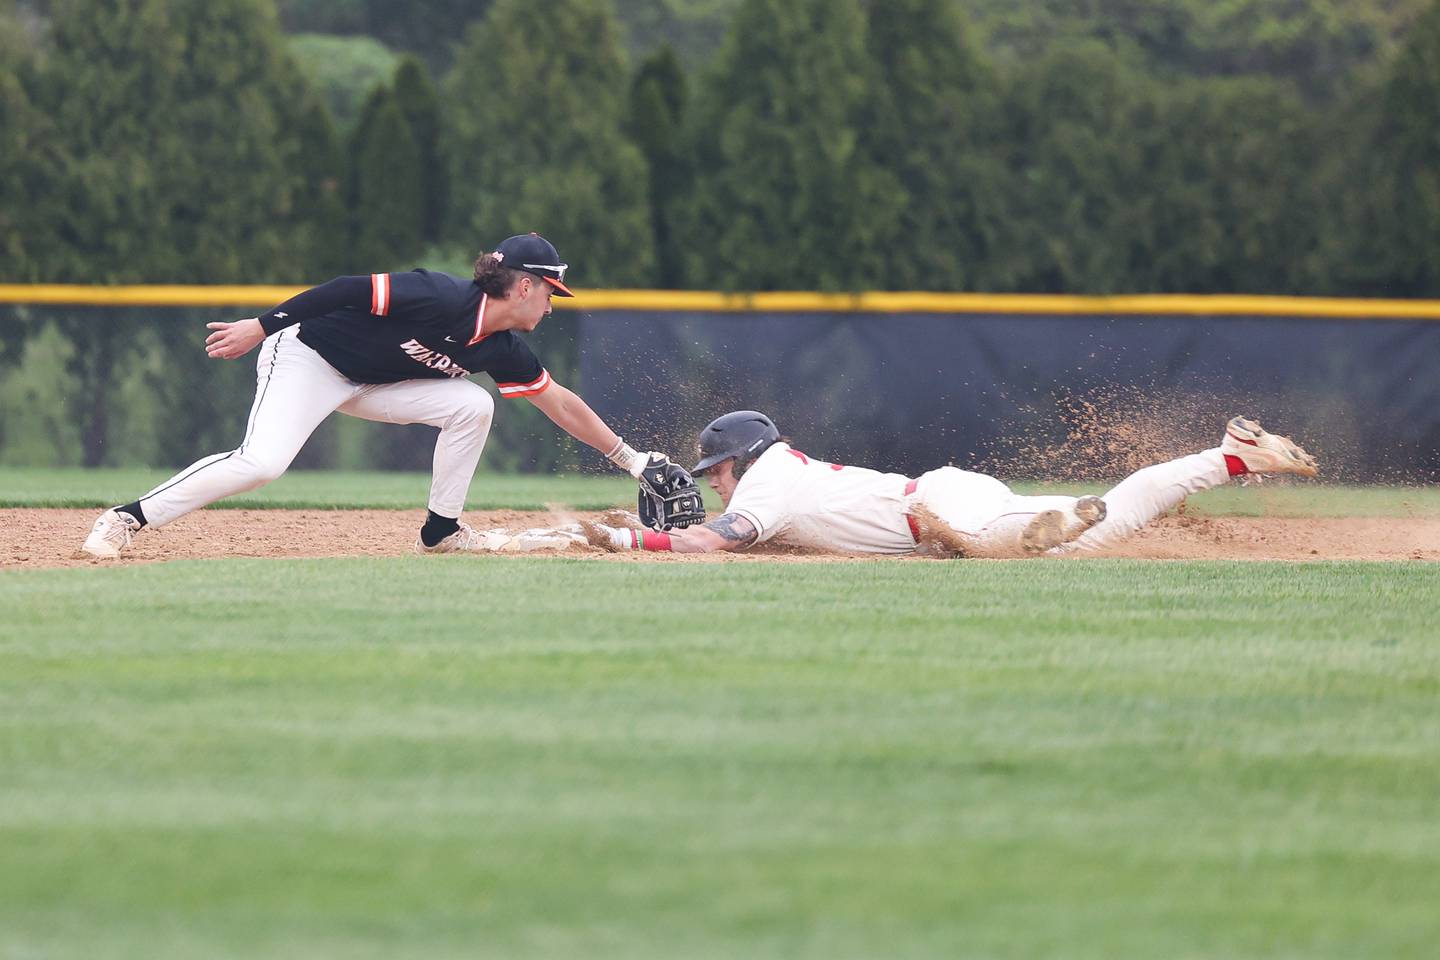 Lincoln-Way Central’s Collin Mowry steals second ahead of the tag by Lincoln-Way West’s Tyler Koscinski on Monday, May 8, 2023 in New Lenox.